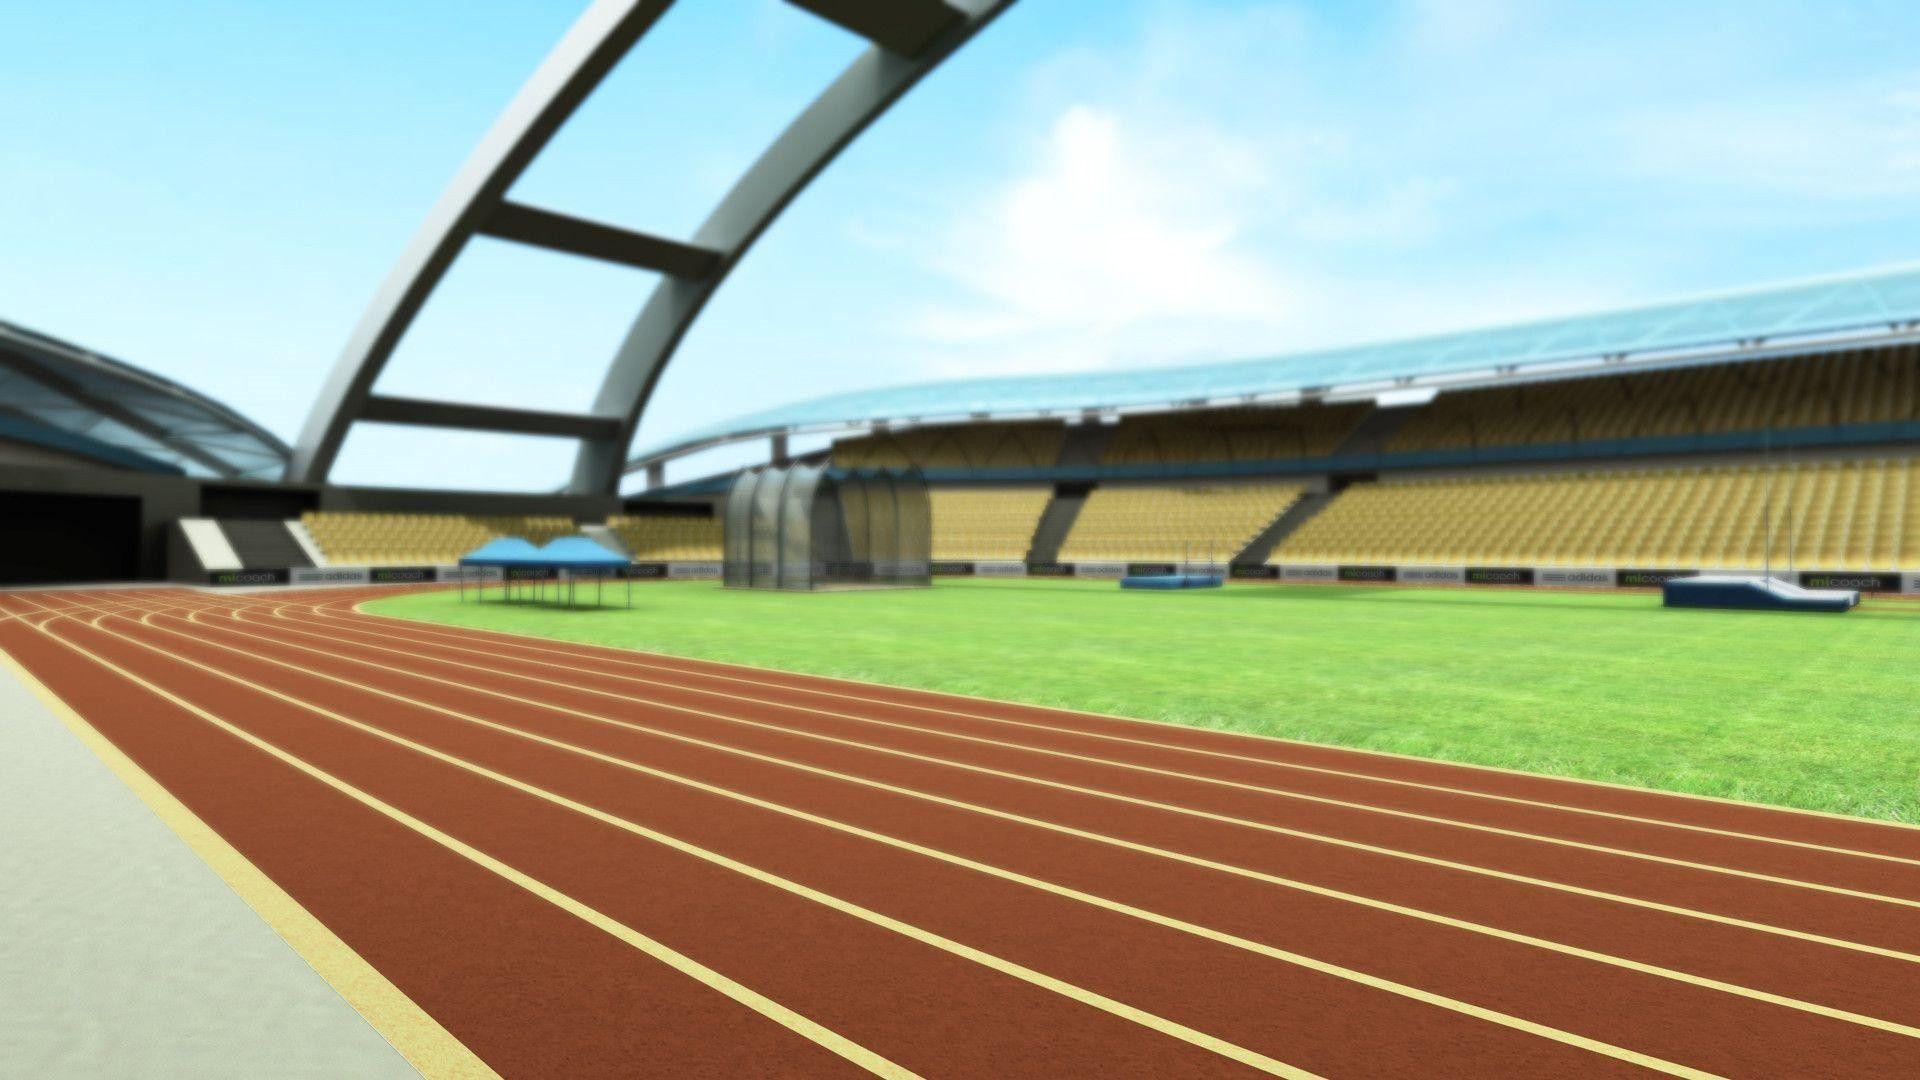 Track And Field Wallpaper Backgrounds - Wallpaper Cave